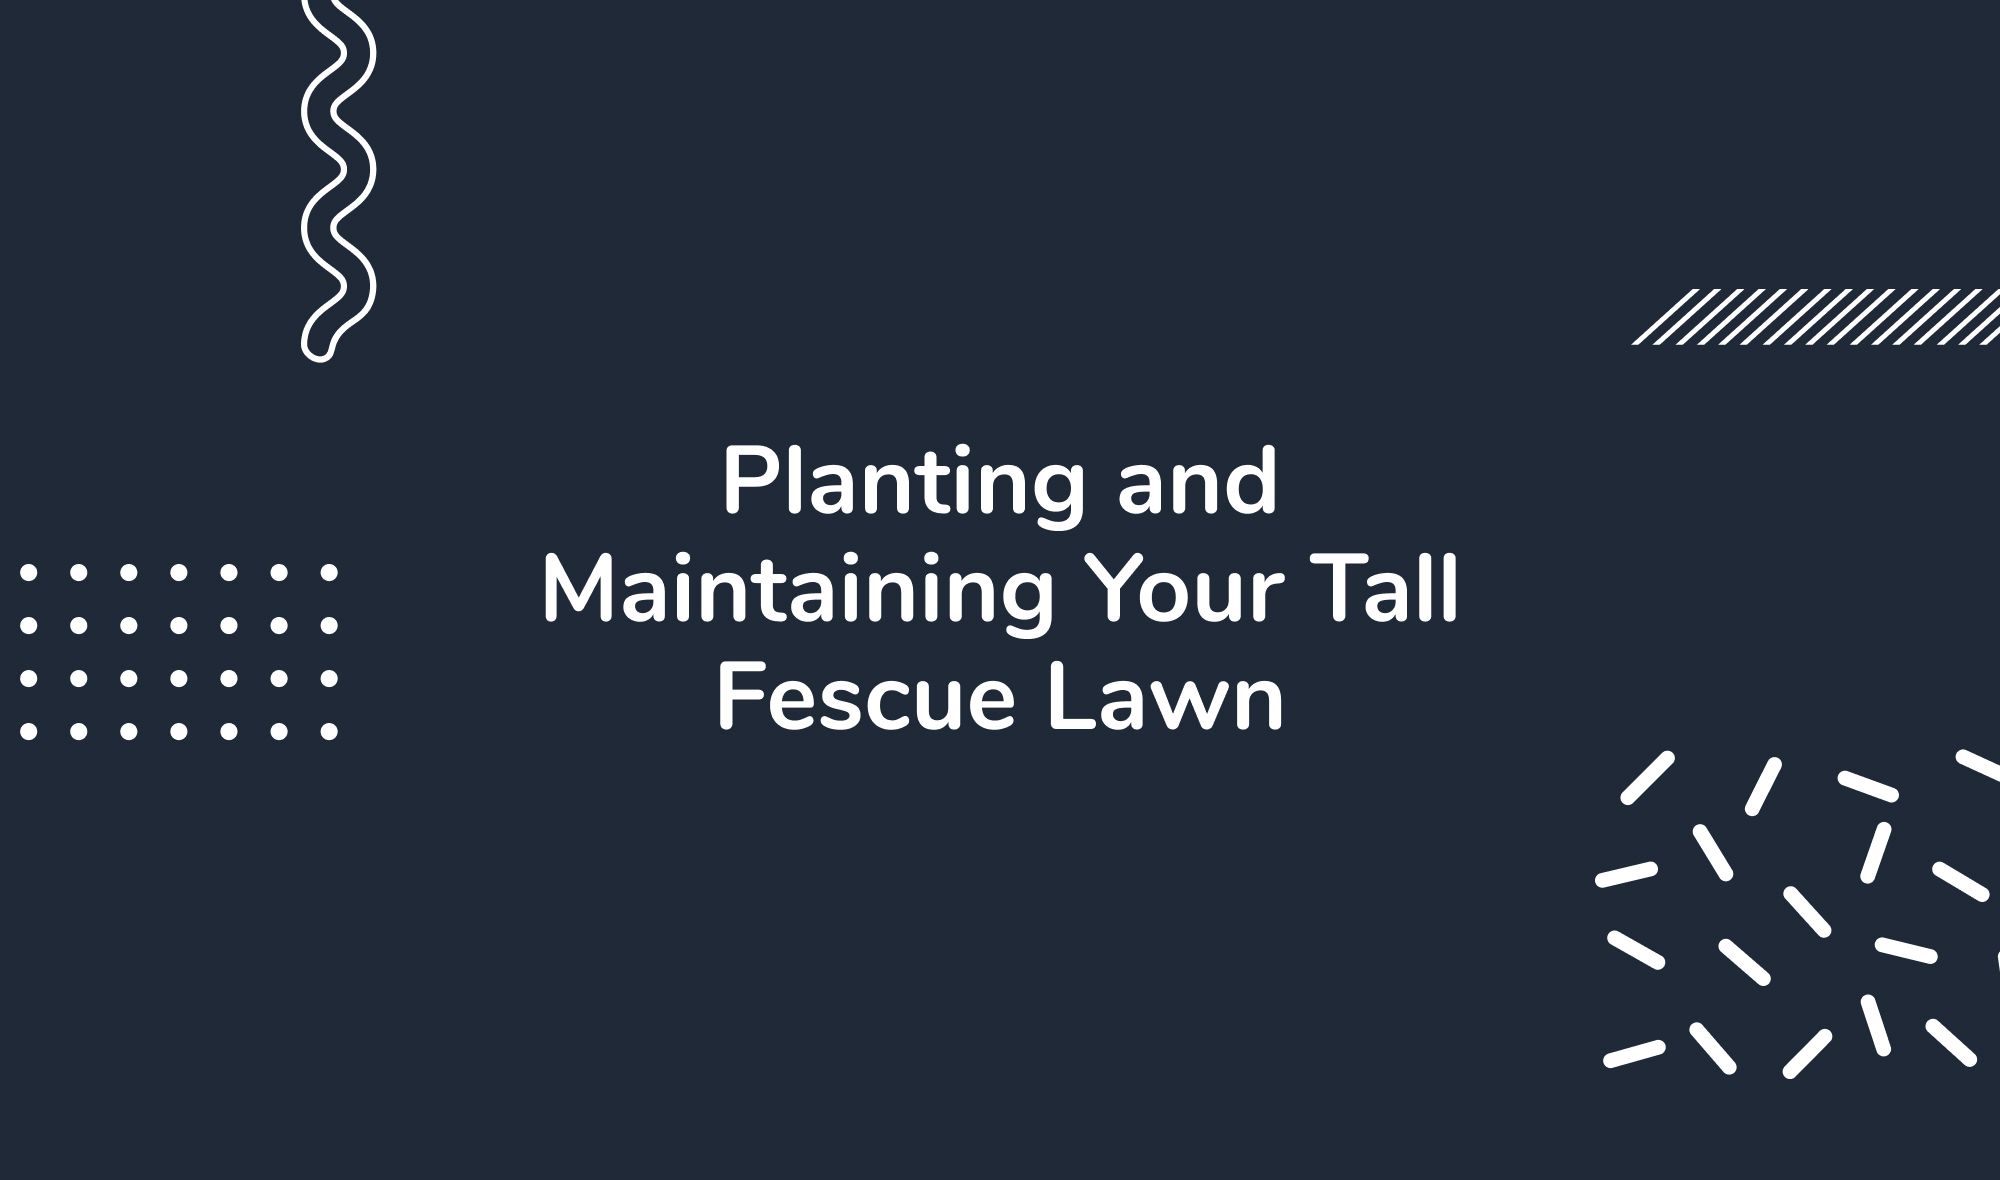 Planting and Maintaining Your Tall Fescue Lawn